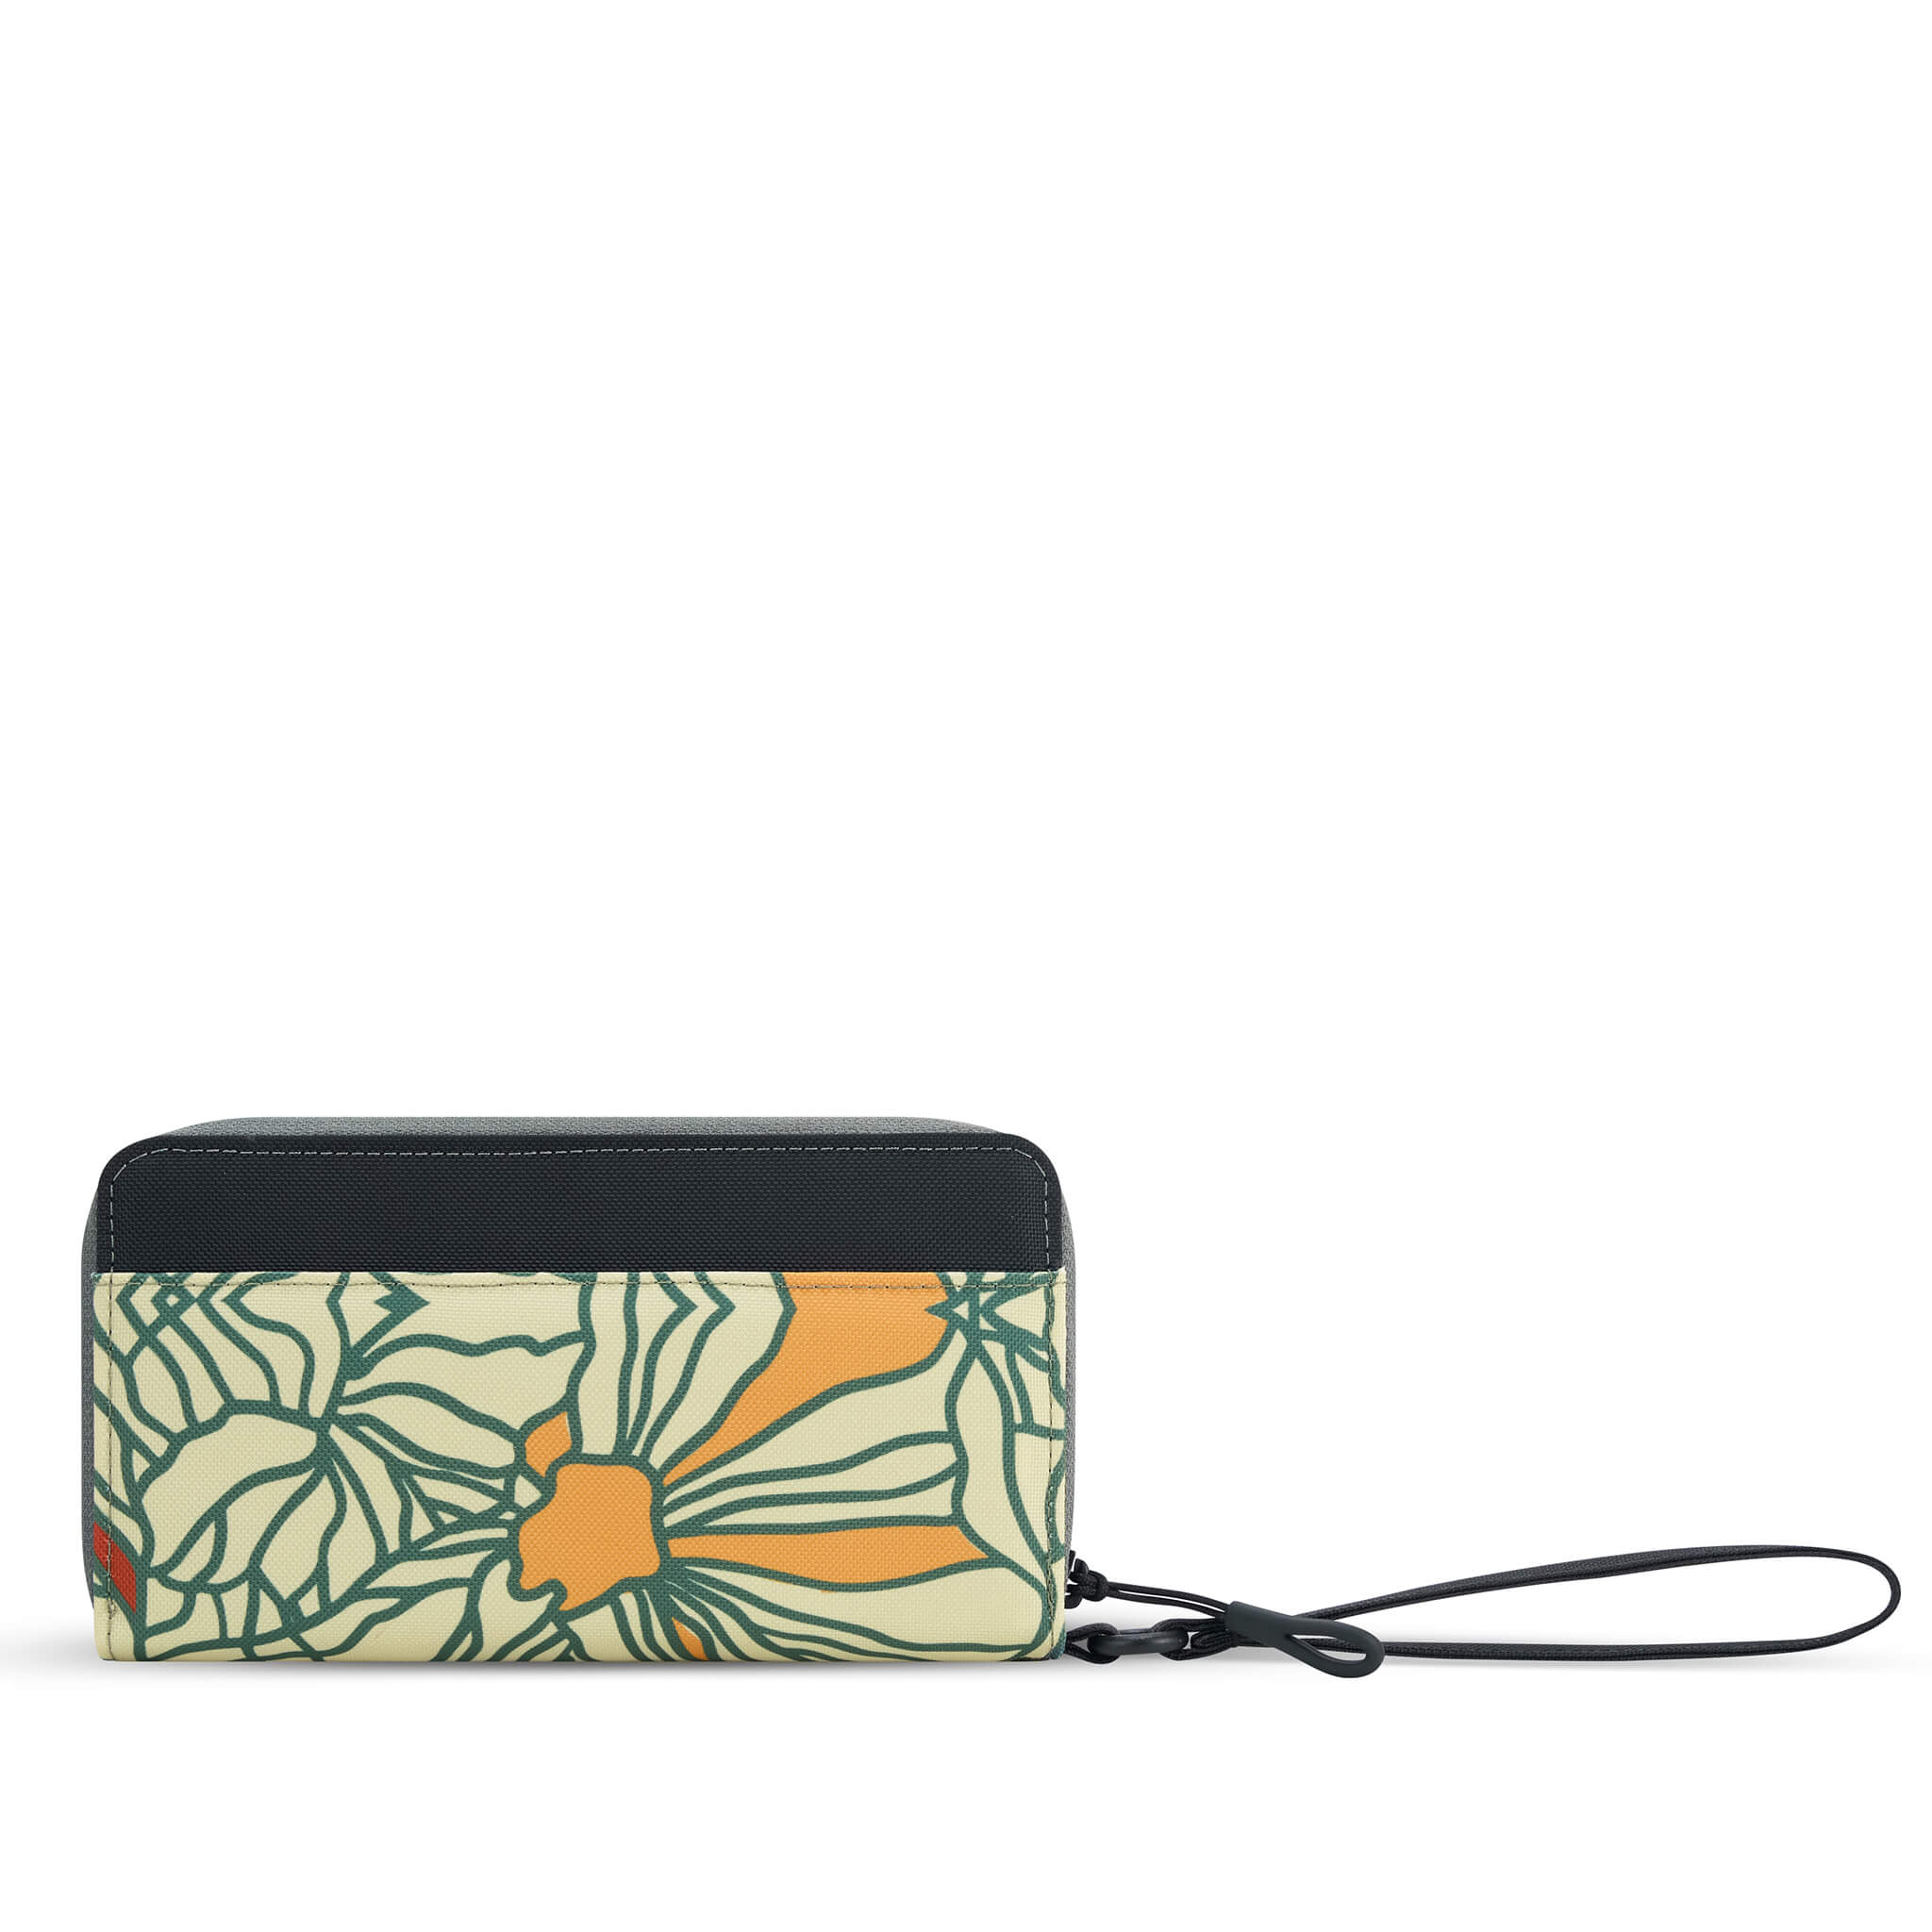 Back view of Sherpani wallet with RFID protection, the Tulum in Fiori. The Tulum is the ideal travel wallet that will organize and protect sensitive information and includes a wristlet strap for easy carrying. The Fiori colorway is a floral pattern with a neutral color palette. 